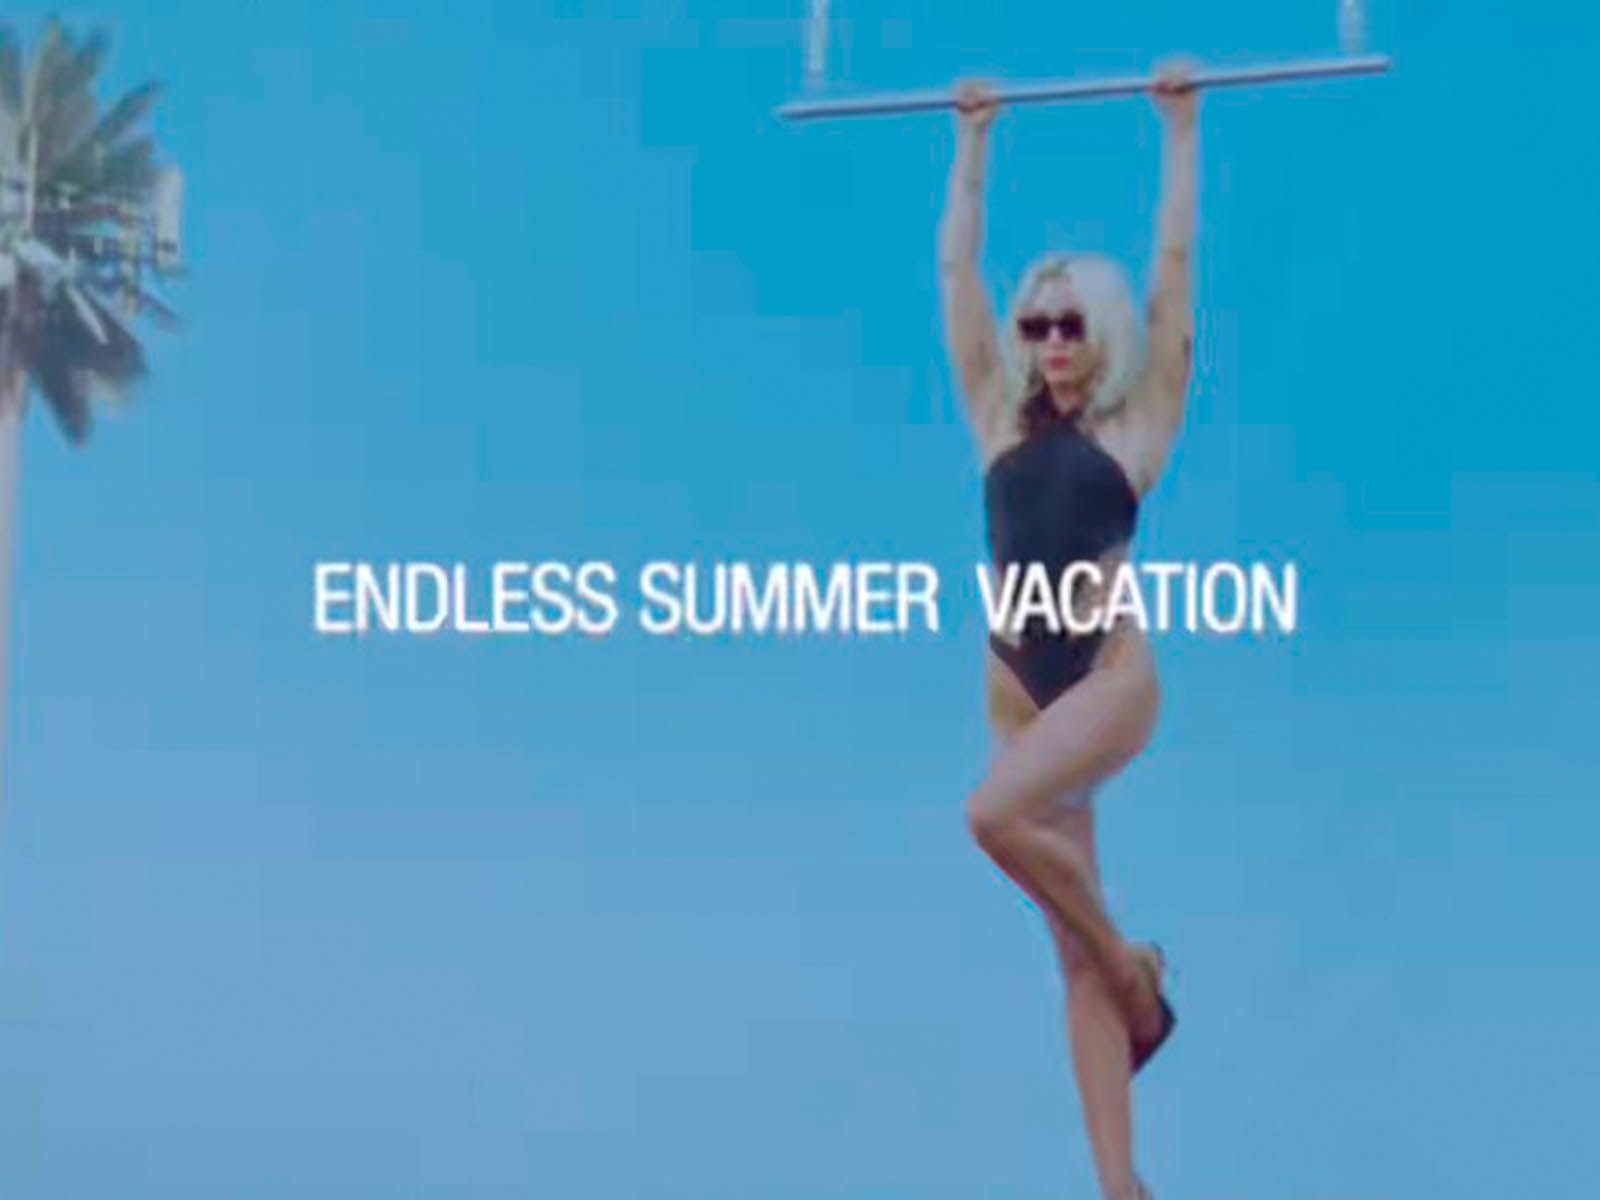 Miley Cyrus releases long-awaited album: Endless Summer Vacation